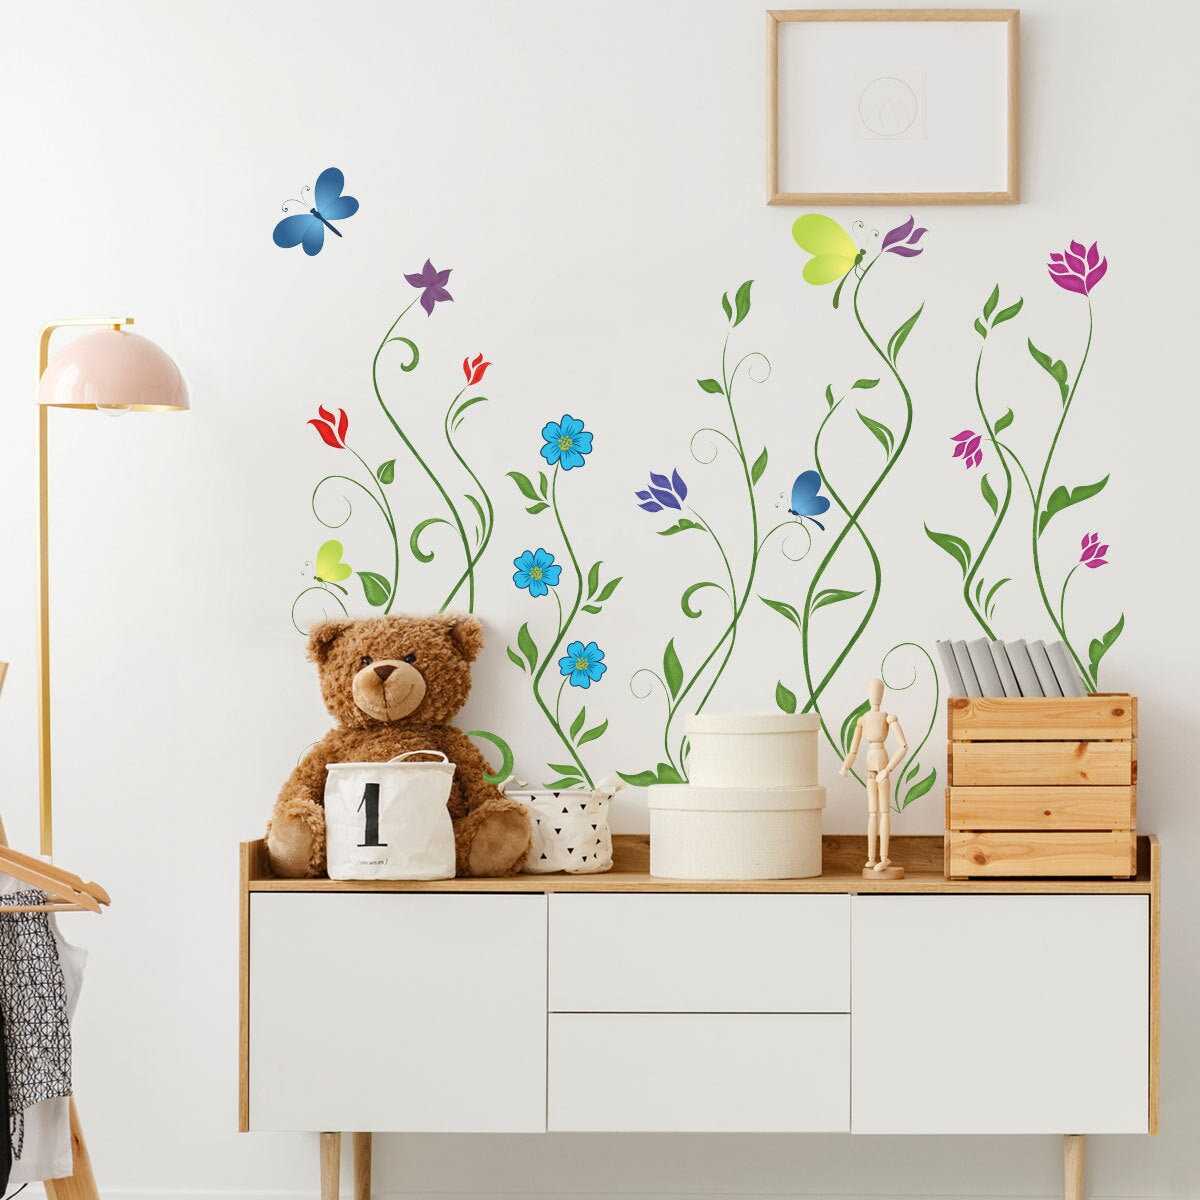 Flowers Wall Stickers | Home Room Decoration Bedroom Bathroom Adhesive Wallpaper Wall Furniture Door House Interior Decor